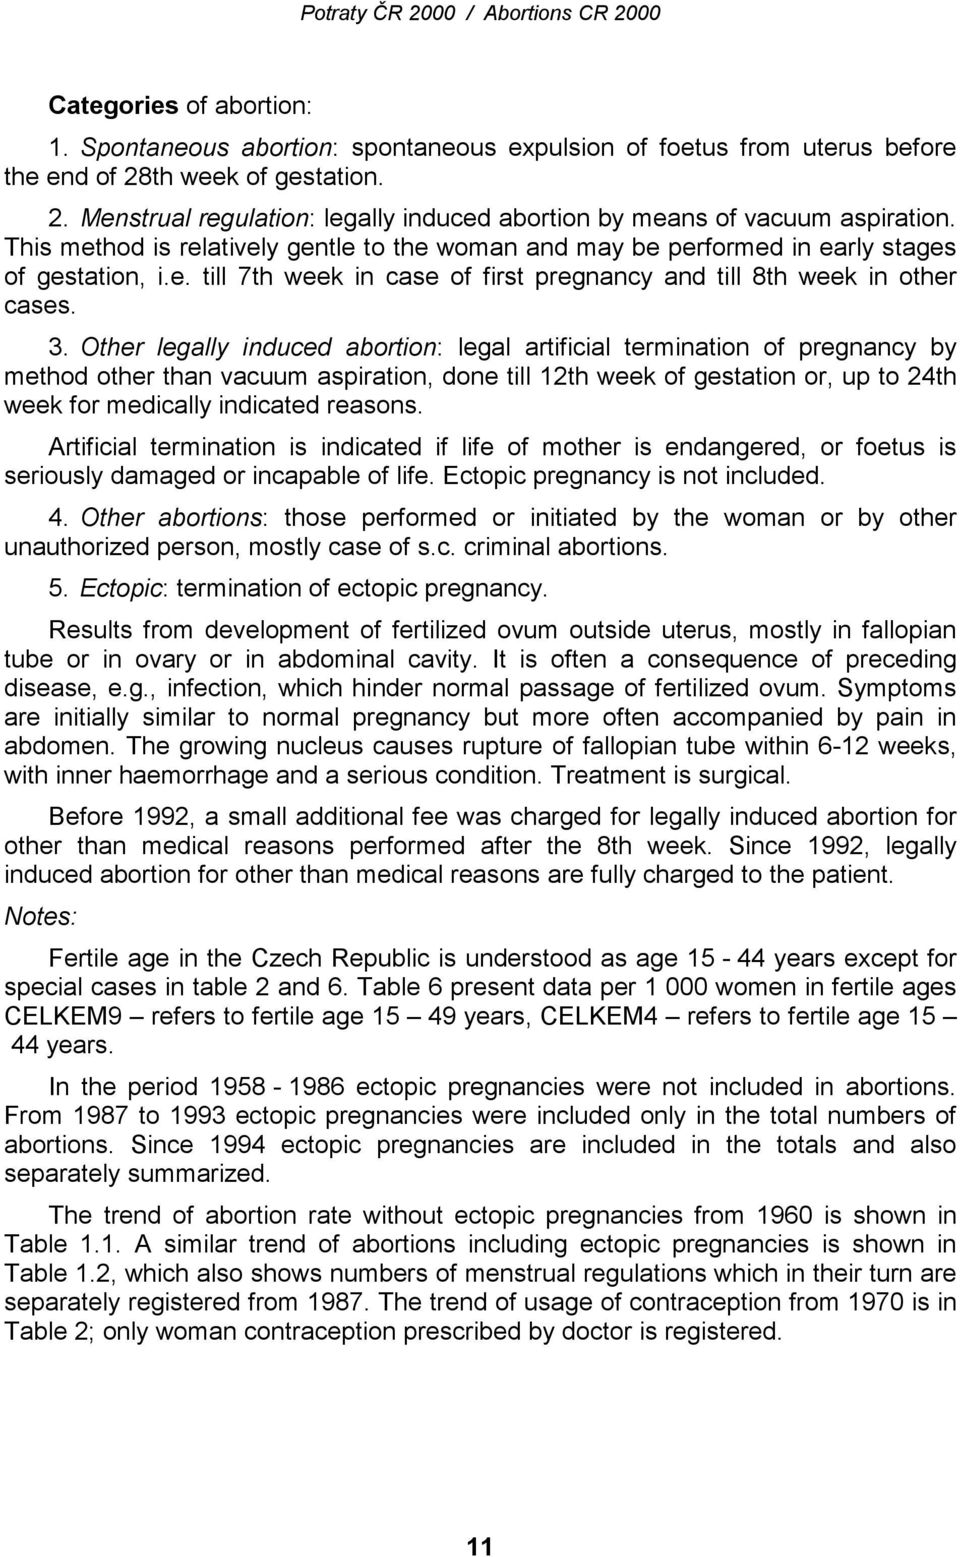 Other legally induced abortion: legal artificial termination of pregnancy by method other than vacuum aspiration, done till 12th week of gestation or, up to 24th week for medically indicated reasons.